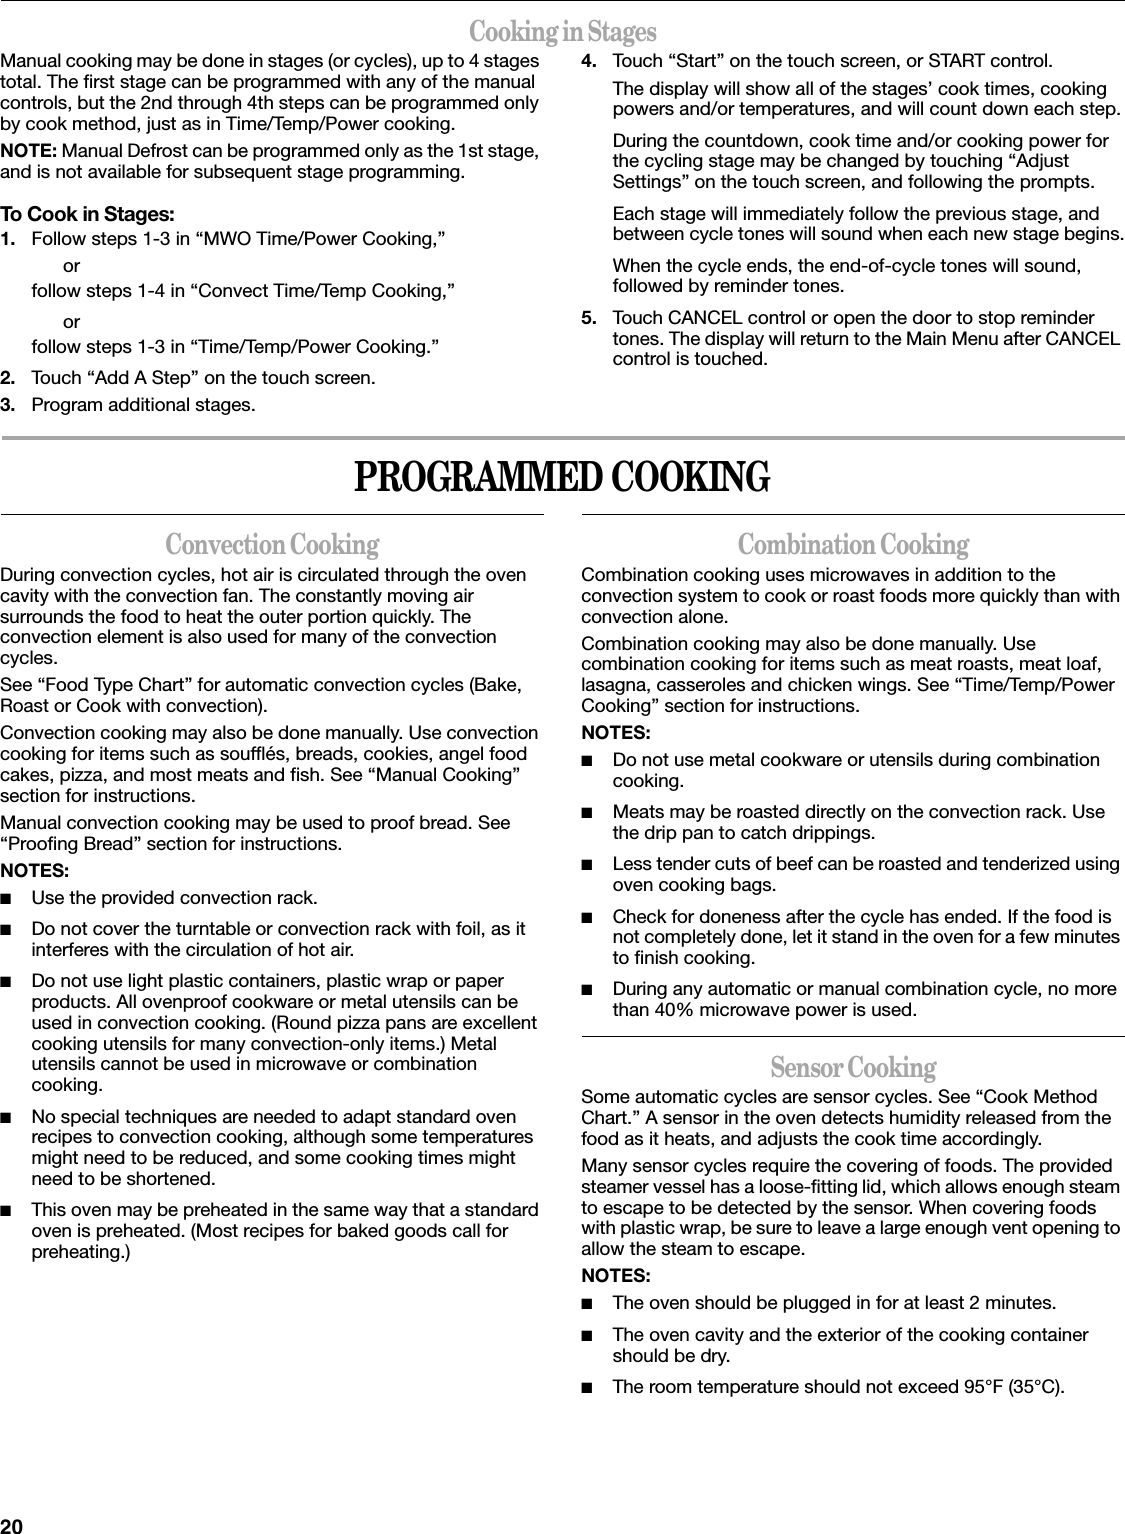 20Cooking in StagesManual cooking may be done in stages (or cycles), up to 4 stages total. The first stage can be programmed with any of the manual controls, but the 2nd through 4th steps can be programmed only by cook method, just as in Time/Temp/Power cooking.NOTE: Manual Defrost can be programmed only as the 1st stage, and is not available for subsequent stage programming.To Cook in Stages:1. Follow steps 1-3 in “MWO Time/Power Cooking,”orfollow steps 1-4 in “Convect Time/Temp Cooking,”orfollow steps 1-3 in “Time/Temp/Power Cooking.”2. Touch “Add A Step” on the touch screen.3. Program additional stages.4. Touch “Start” on the touch screen, or START control.The display will show all of the stages’ cook times, cooking powers and/or temperatures, and will count down each step.During the countdown, cook time and/or cooking power for the cycling stage may be changed by touching “Adjust Settings” on the touch screen, and following the prompts.Each stage will immediately follow the previous stage, and between cycle tones will sound when each new stage begins.When the cycle ends, the end-of-cycle tones will sound, followed by reminder tones.5. Touch CANCEL control or open the door to stop reminder tones. The display will return to the Main Menu after CANCEL control is touched.PROGRAMMED COOKINGConvection CookingDuring convection cycles, hot air is circulated through the oven cavity with the convection fan. The constantly moving air surrounds the food to heat the outer portion quickly. The convection element is also used for many of the convection cycles.See “Food Type Chart” for automatic convection cycles (Bake, Roast or Cook with convection).Convection cooking may also be done manually. Use convection cooking for items such as soufflés, breads, cookies, angel food cakes, pizza, and most meats and fish. See “Manual Cooking” section for instructions.Manual convection cooking may be used to proof bread. See “Proofing Bread” section for instructions.NOTES:■Use the provided convection rack.■Do not cover the turntable or convection rack with foil, as it interferes with the circulation of hot air.■Do not use light plastic containers, plastic wrap or paper products. All ovenproof cookware or metal utensils can be used in convection cooking. (Round pizza pans are excellent cooking utensils for many convection-only items.) Metal utensils cannot be used in microwave or combination cooking.■No special techniques are needed to adapt standard oven recipes to convection cooking, although some temperatures might need to be reduced, and some cooking times might need to be shortened.■This oven may be preheated in the same way that a standard oven is preheated. (Most recipes for baked goods call for preheating.)Combination CookingCombination cooking uses microwaves in addition to the convection system to cook or roast foods more quickly than with convection alone.Combination cooking may also be done manually. Use combination cooking for items such as meat roasts, meat loaf, lasagna, casseroles and chicken wings. See “Time/Temp/Power Cooking” section for instructions.NOTES:■Do not use metal cookware or utensils during combination cooking.■Meats may be roasted directly on the convection rack. Use the drip pan to catch drippings.■Less tender cuts of beef can be roasted and tenderized using oven cooking bags.■Check for doneness after the cycle has ended. If the food is not completely done, let it stand in the oven for a few minutes to finish cooking.■During any automatic or manual combination cycle, no more than 40% microwave power is used.Sensor CookingSome automatic cycles are sensor cycles. See “Cook Method Chart.” A sensor in the oven detects humidity released from the food as it heats, and adjusts the cook time accordingly.Many sensor cycles require the covering of foods. The provided steamer vessel has a loose-fitting lid, which allows enough steam to escape to be detected by the sensor. When covering foods with plastic wrap, be sure to leave a large enough vent opening to allow the steam to escape.NOTES:■The oven should be plugged in for at least 2 minutes.■The oven cavity and the exterior of the cooking container should be dry.■The room temperature should not exceed 95°F (35°C).